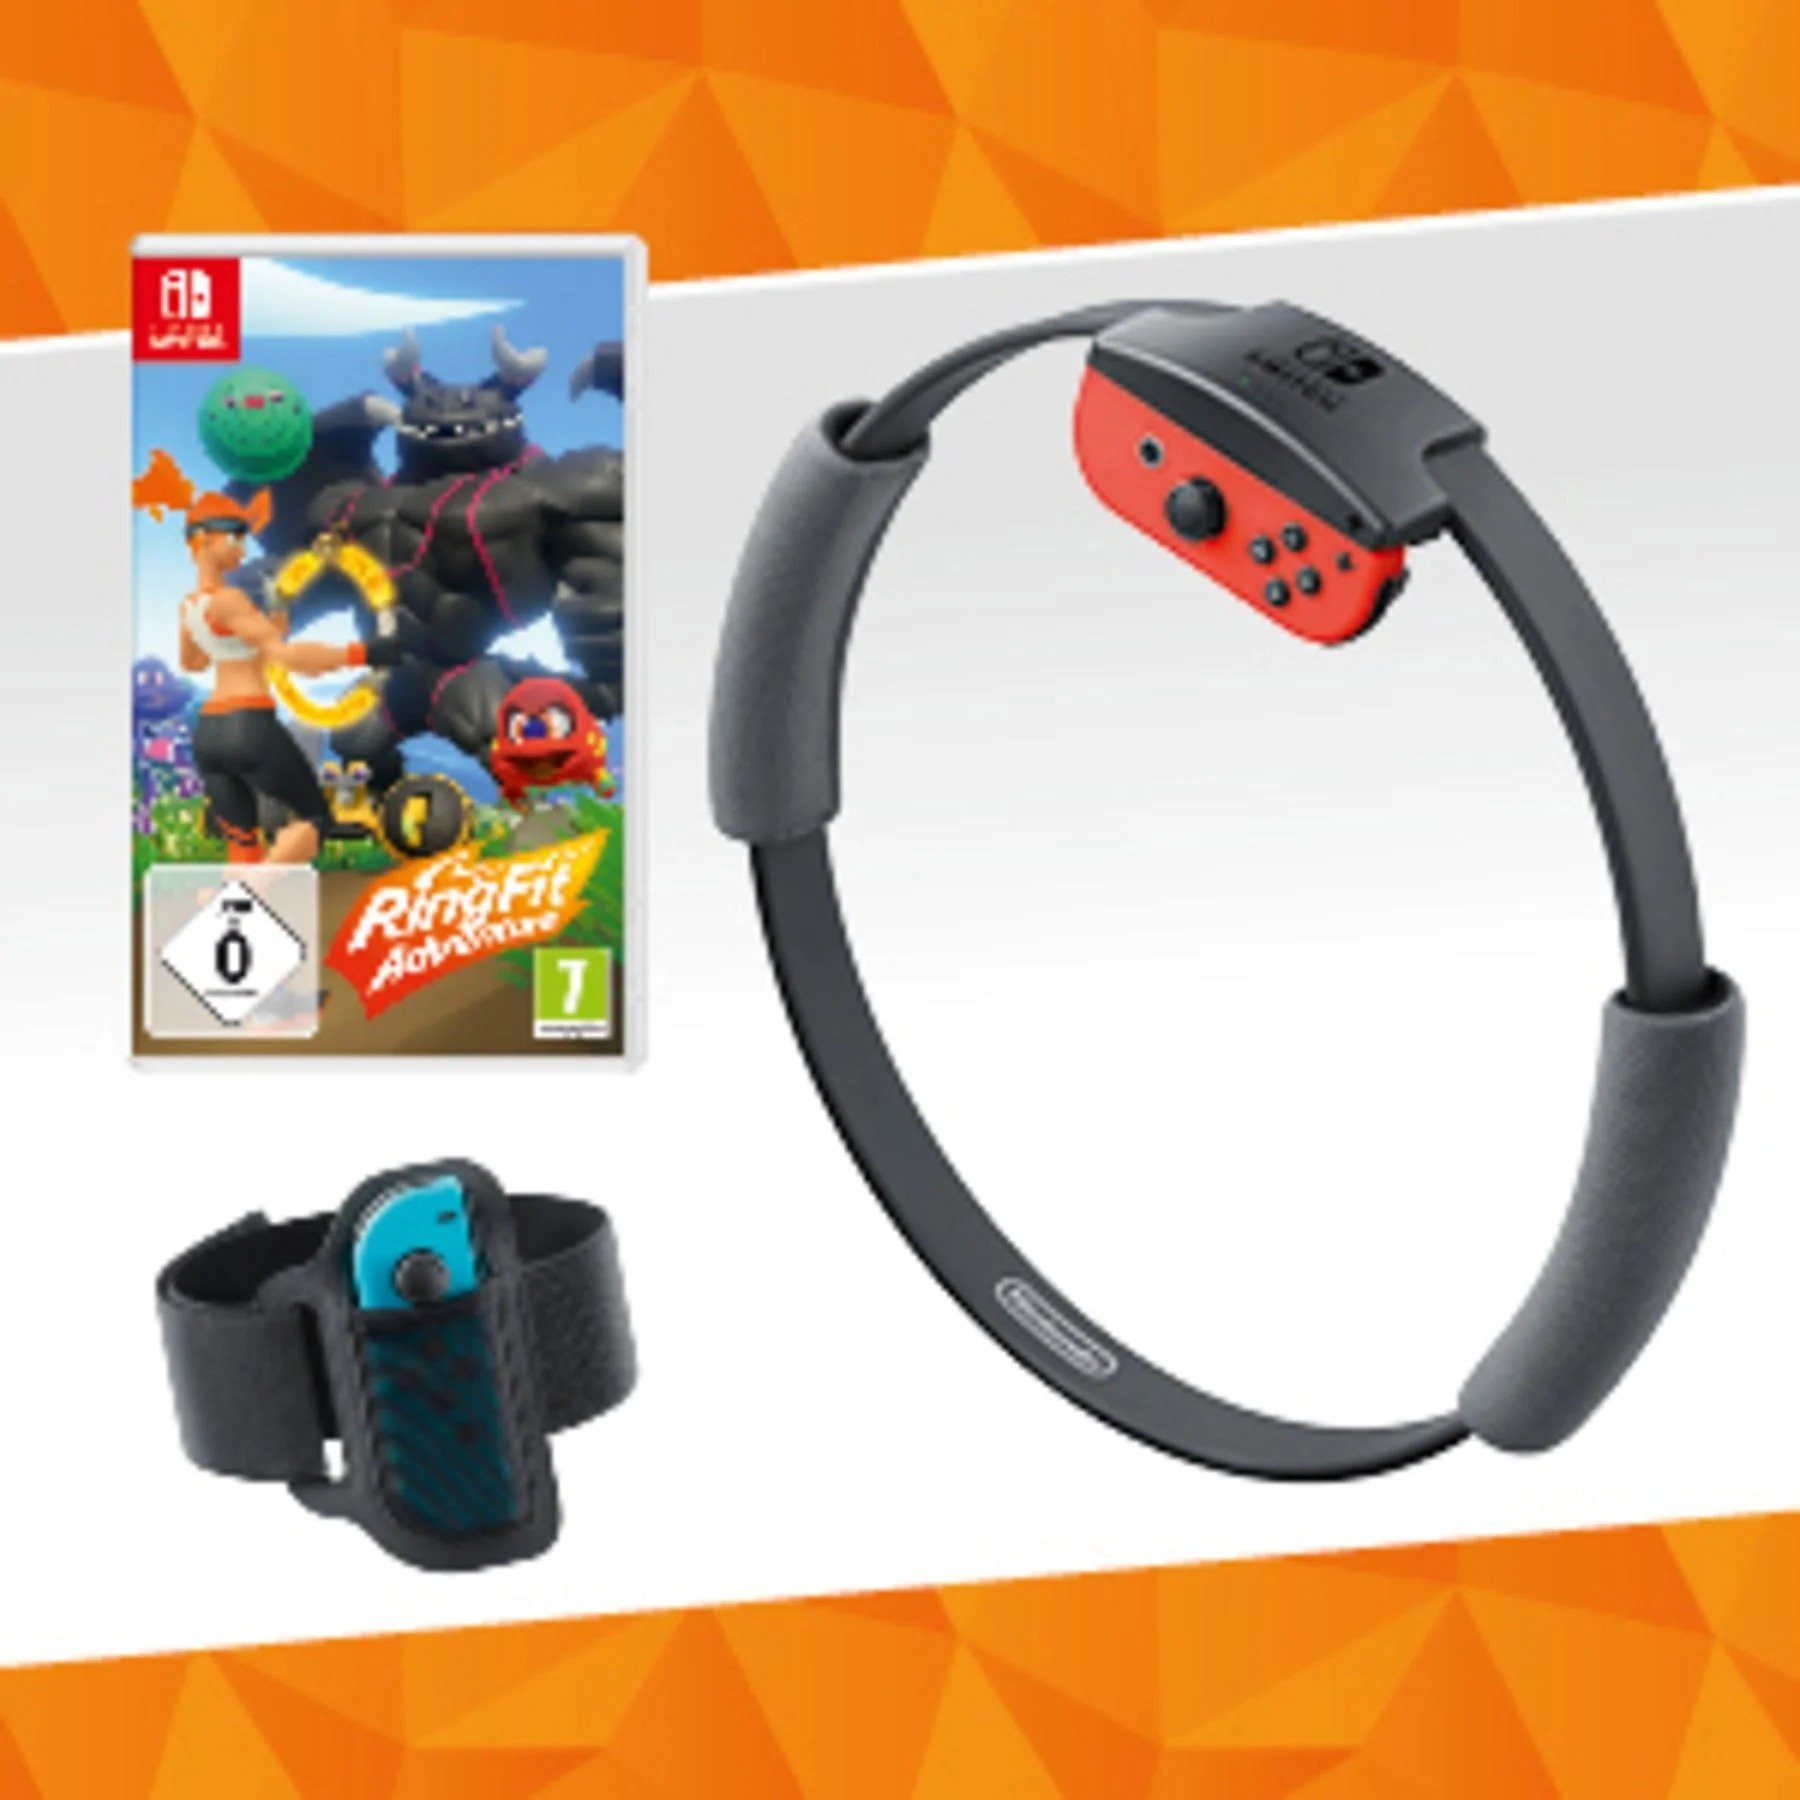 inkl. Switch Nintendo Ring Ring-Con & Spiel. Beingurt Fit Switch-Controller Adventure